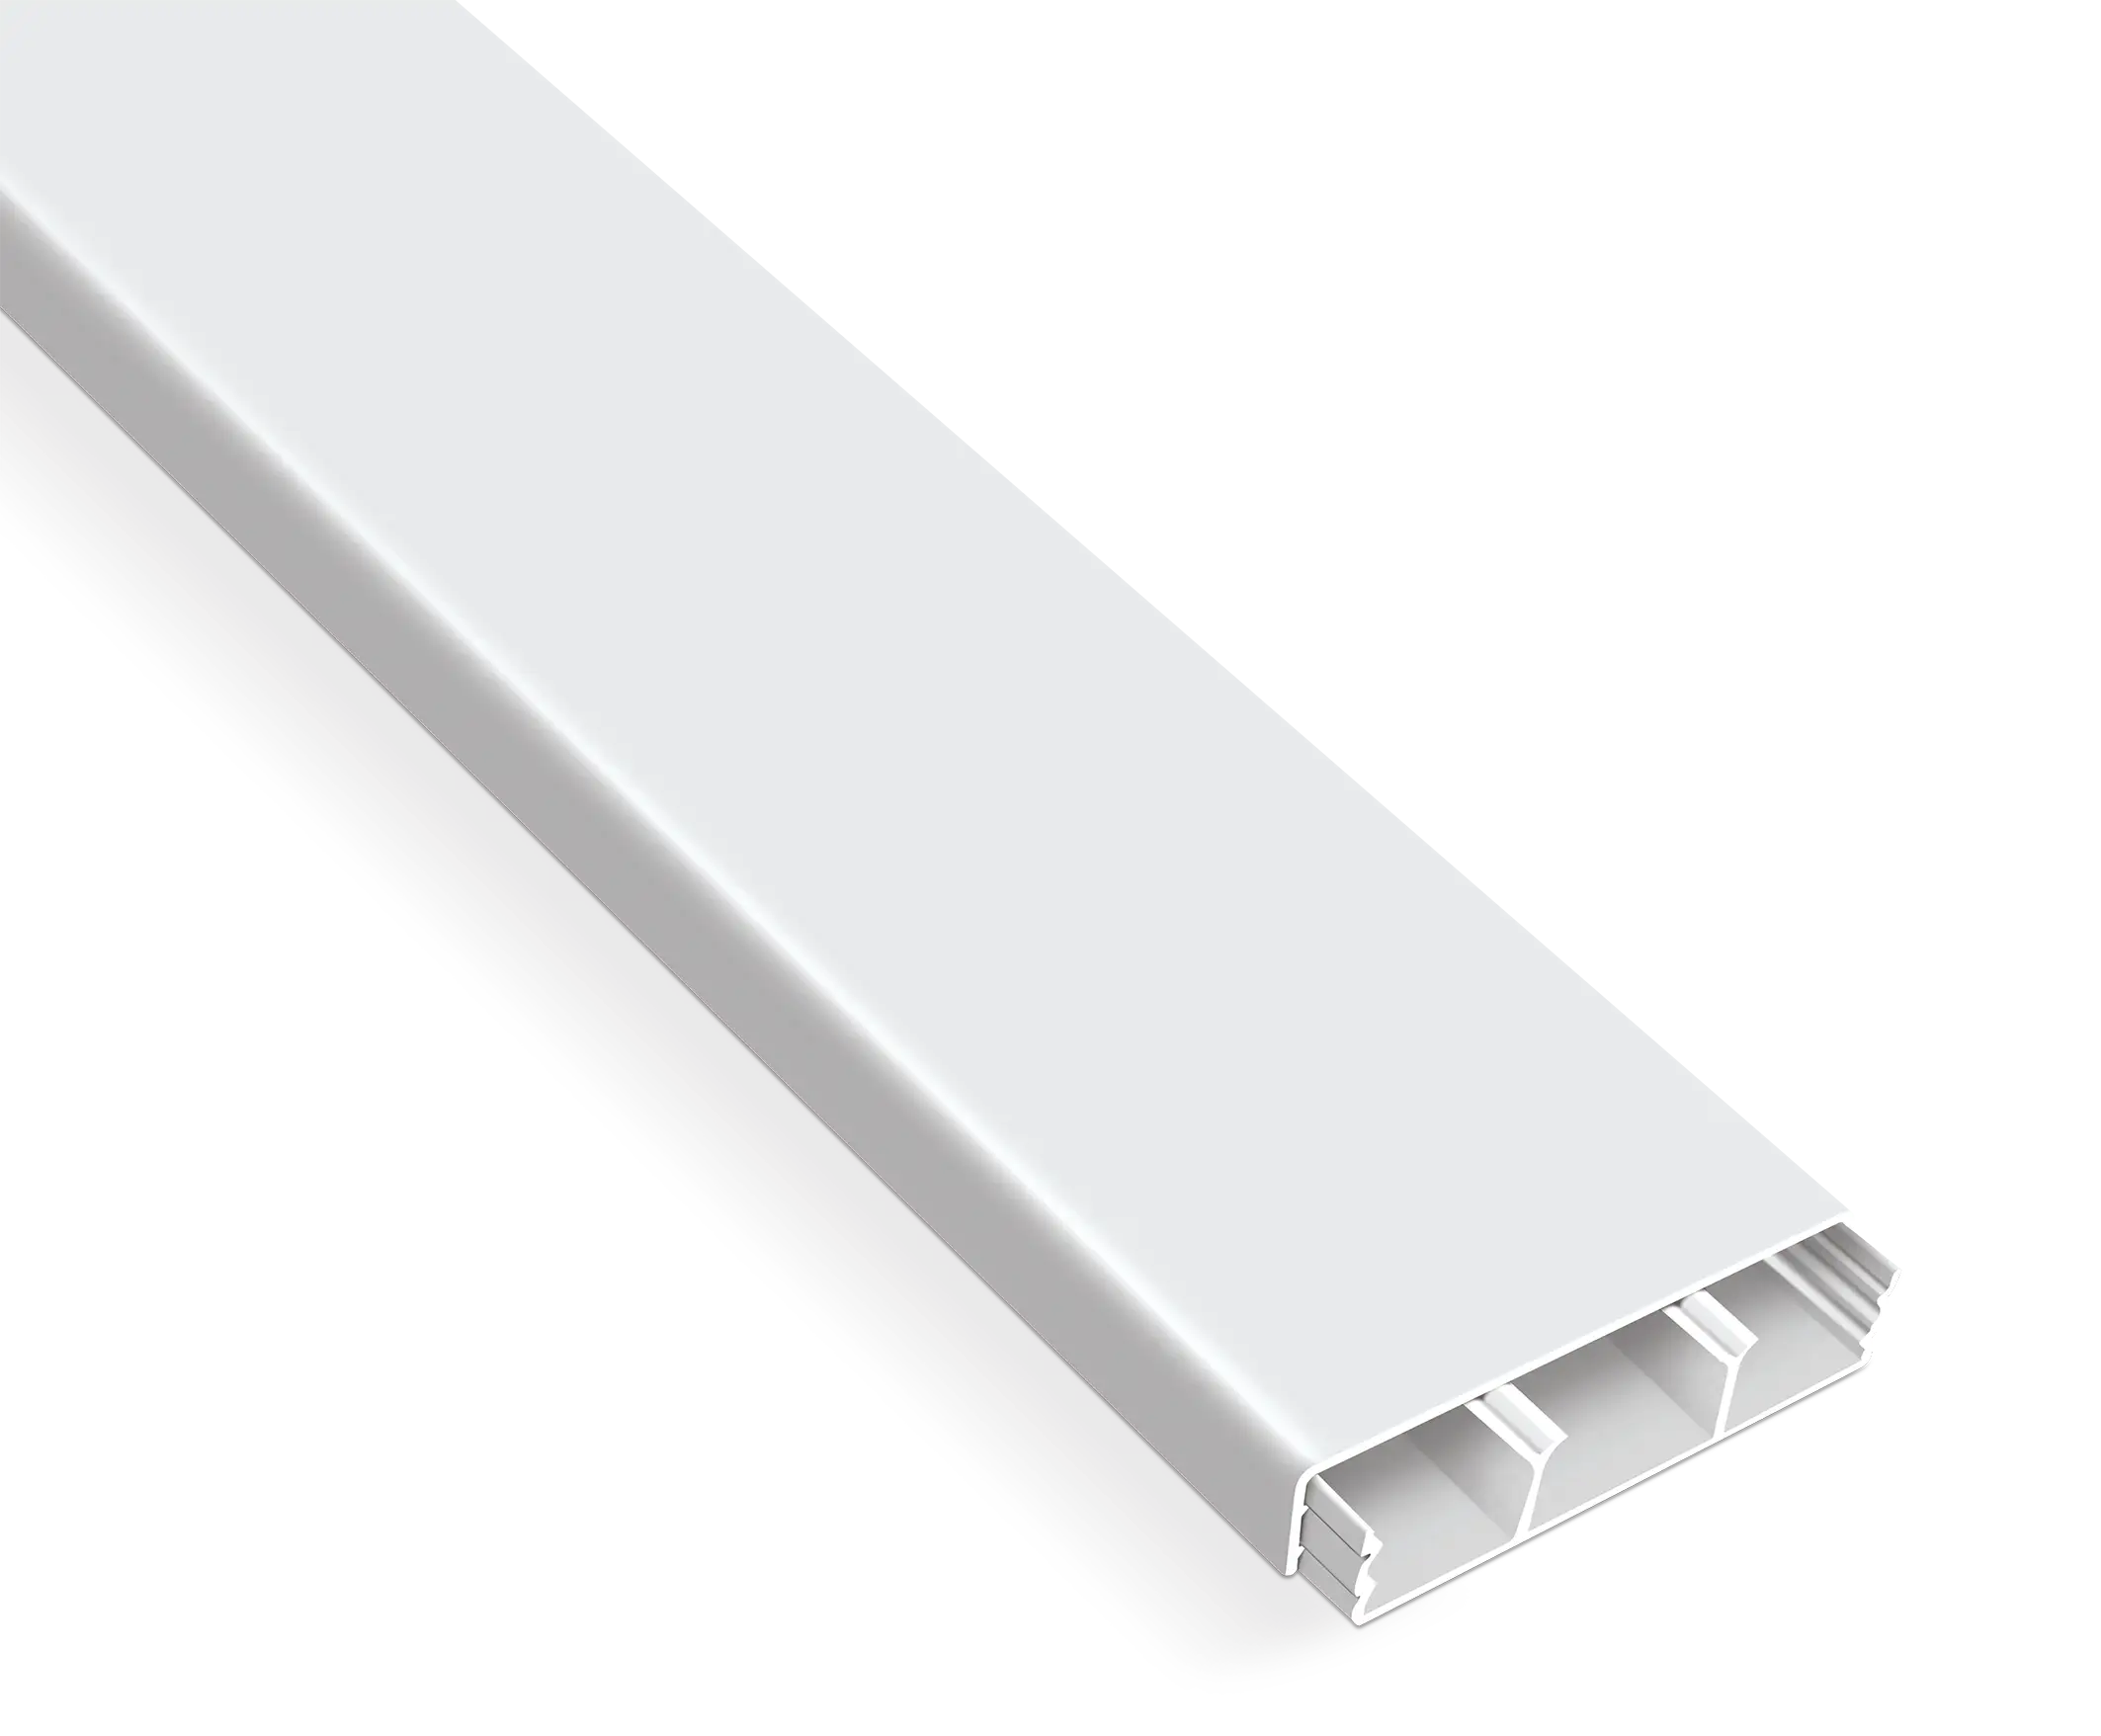 Meks Series Partitioned Cable Trunking With External Cover